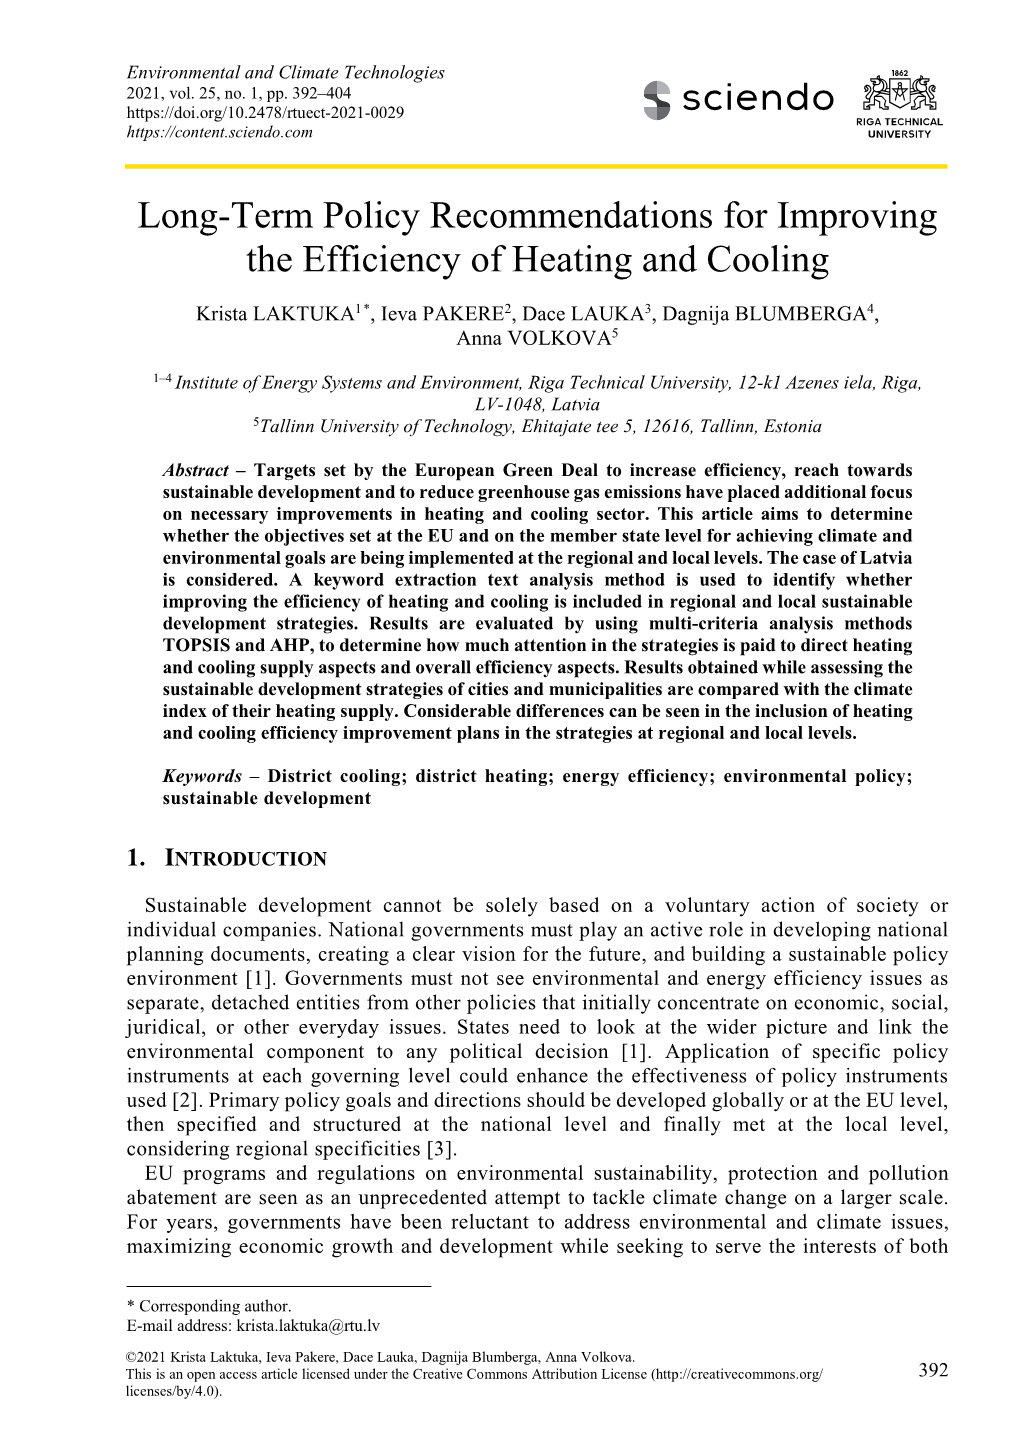 Long-Term Policy Recommendations for Improving the Efficiency of Heating and Cooling